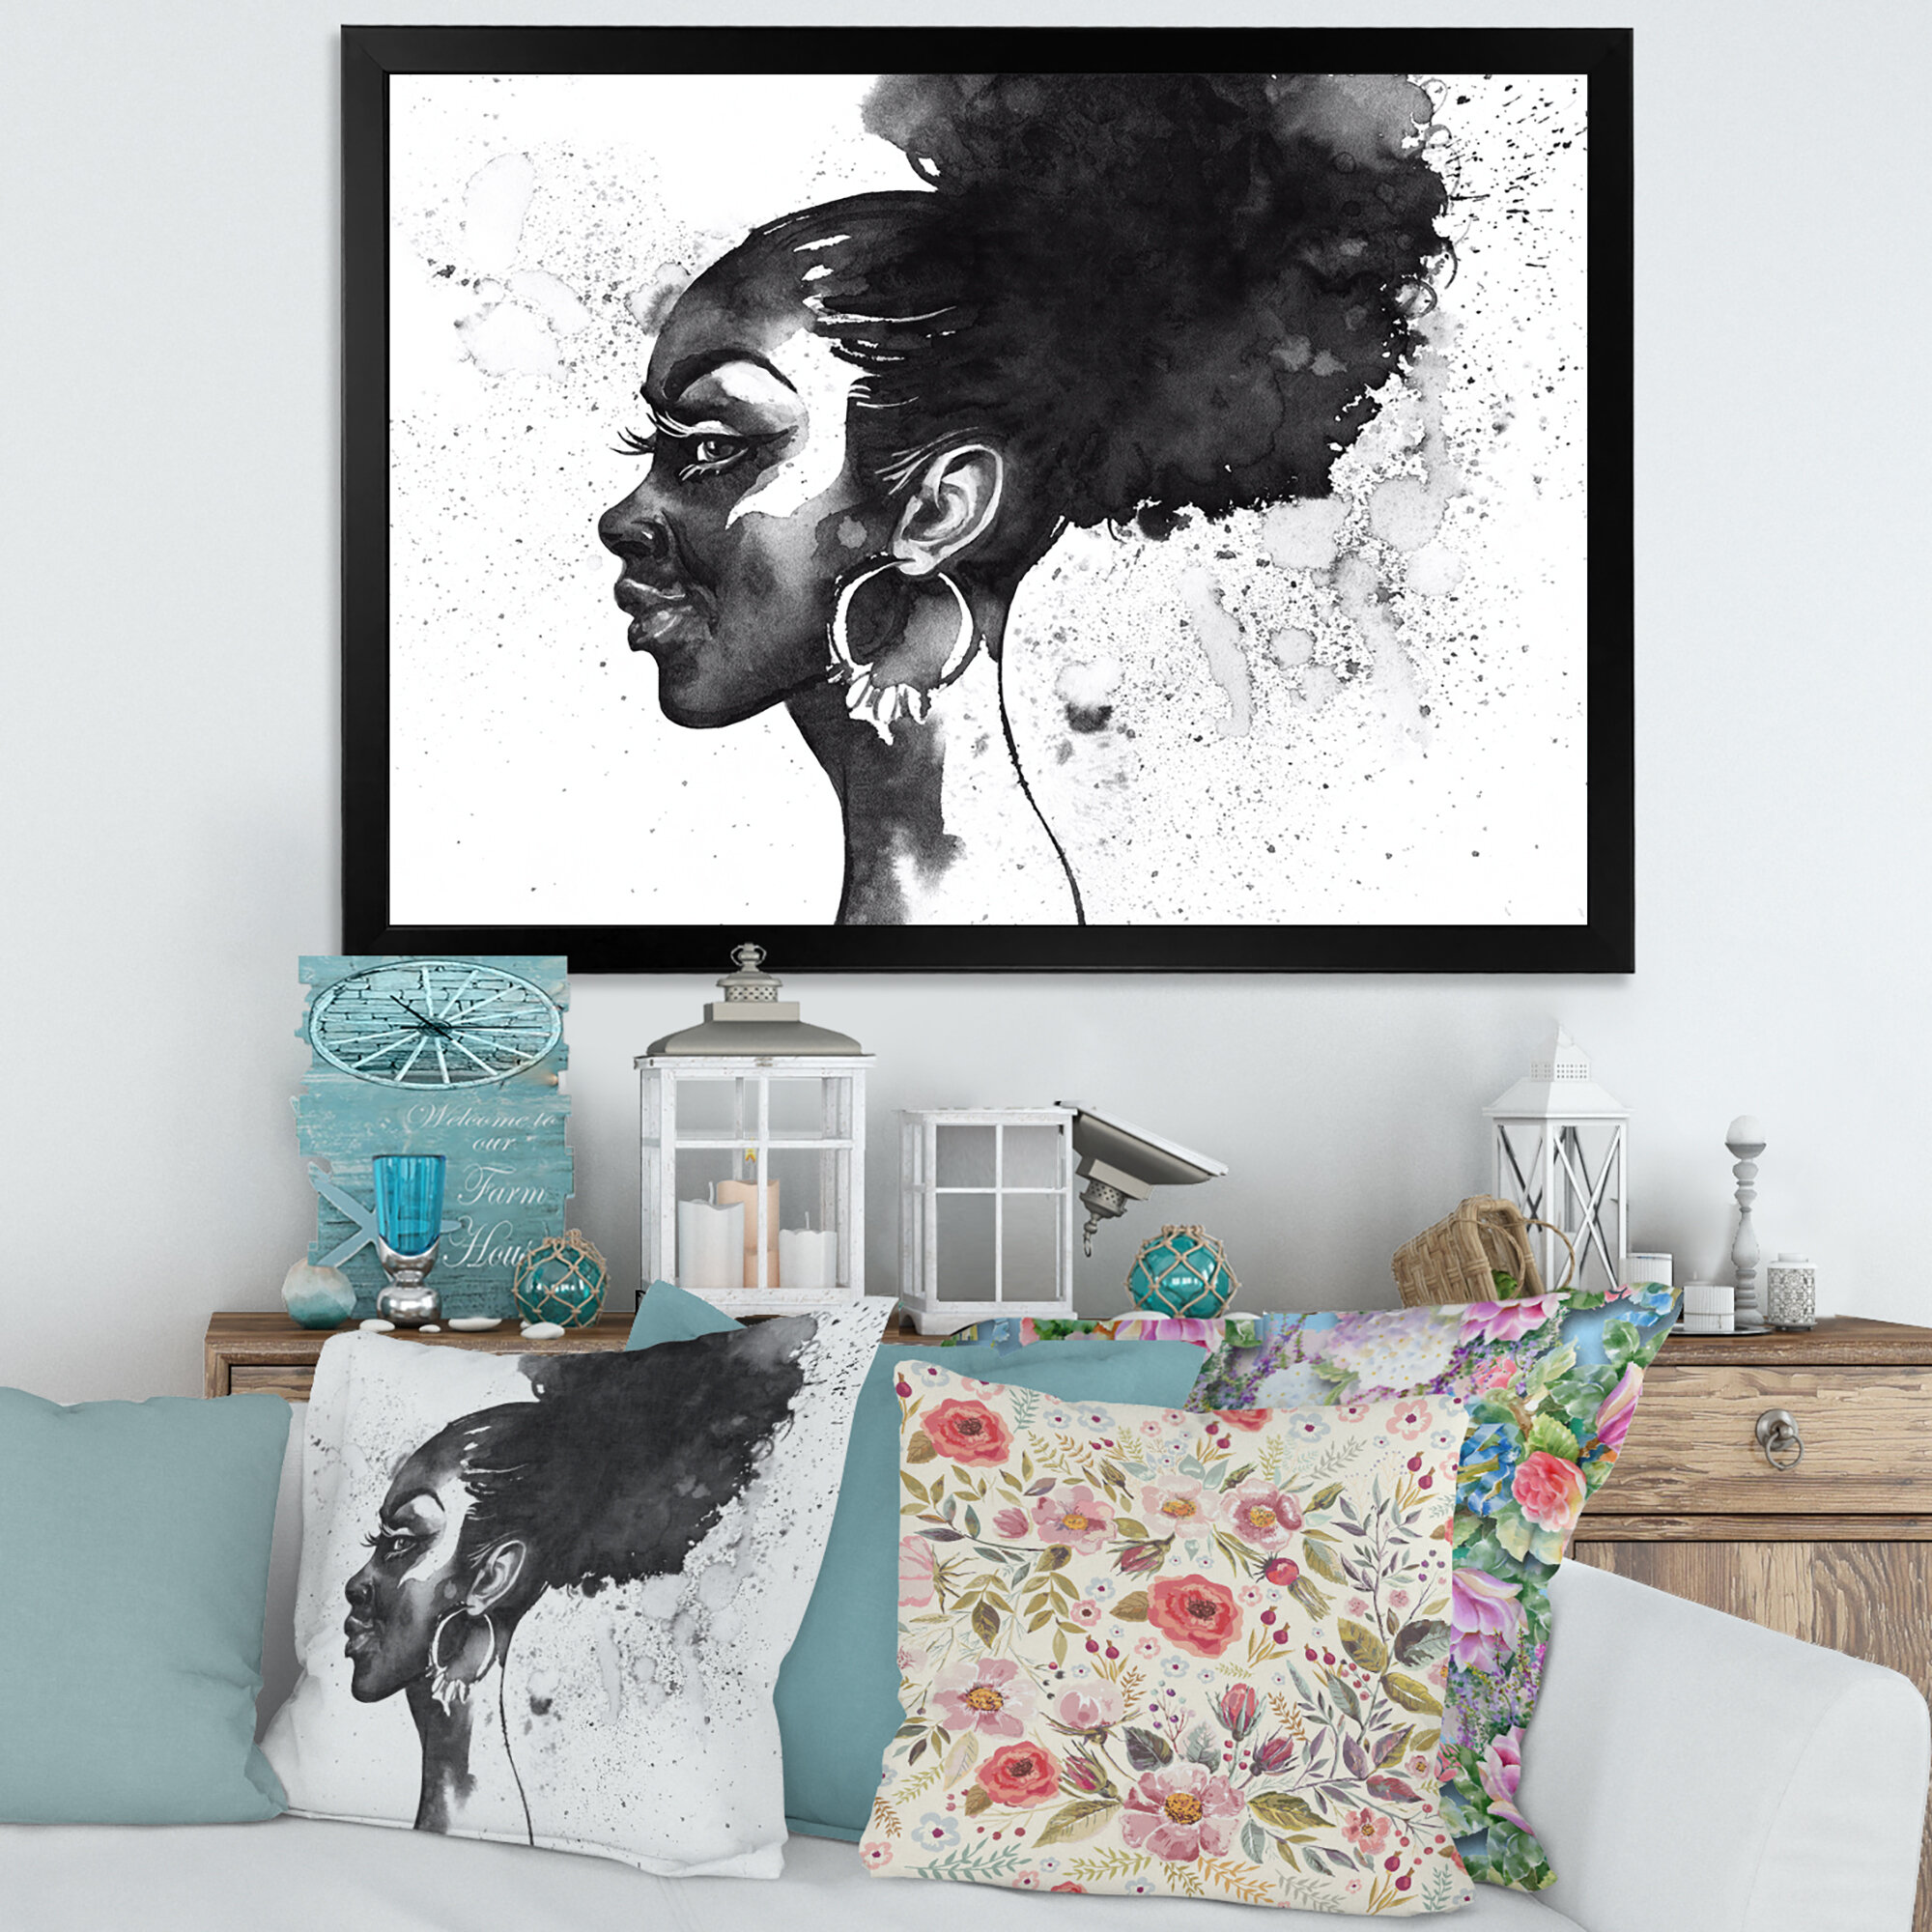 Monochrome Portrait of African American Woman I - Painting on Canvas East Urban Home Size: 24 H x 32 W x 1.5 D, Format: Black Framed Canvas